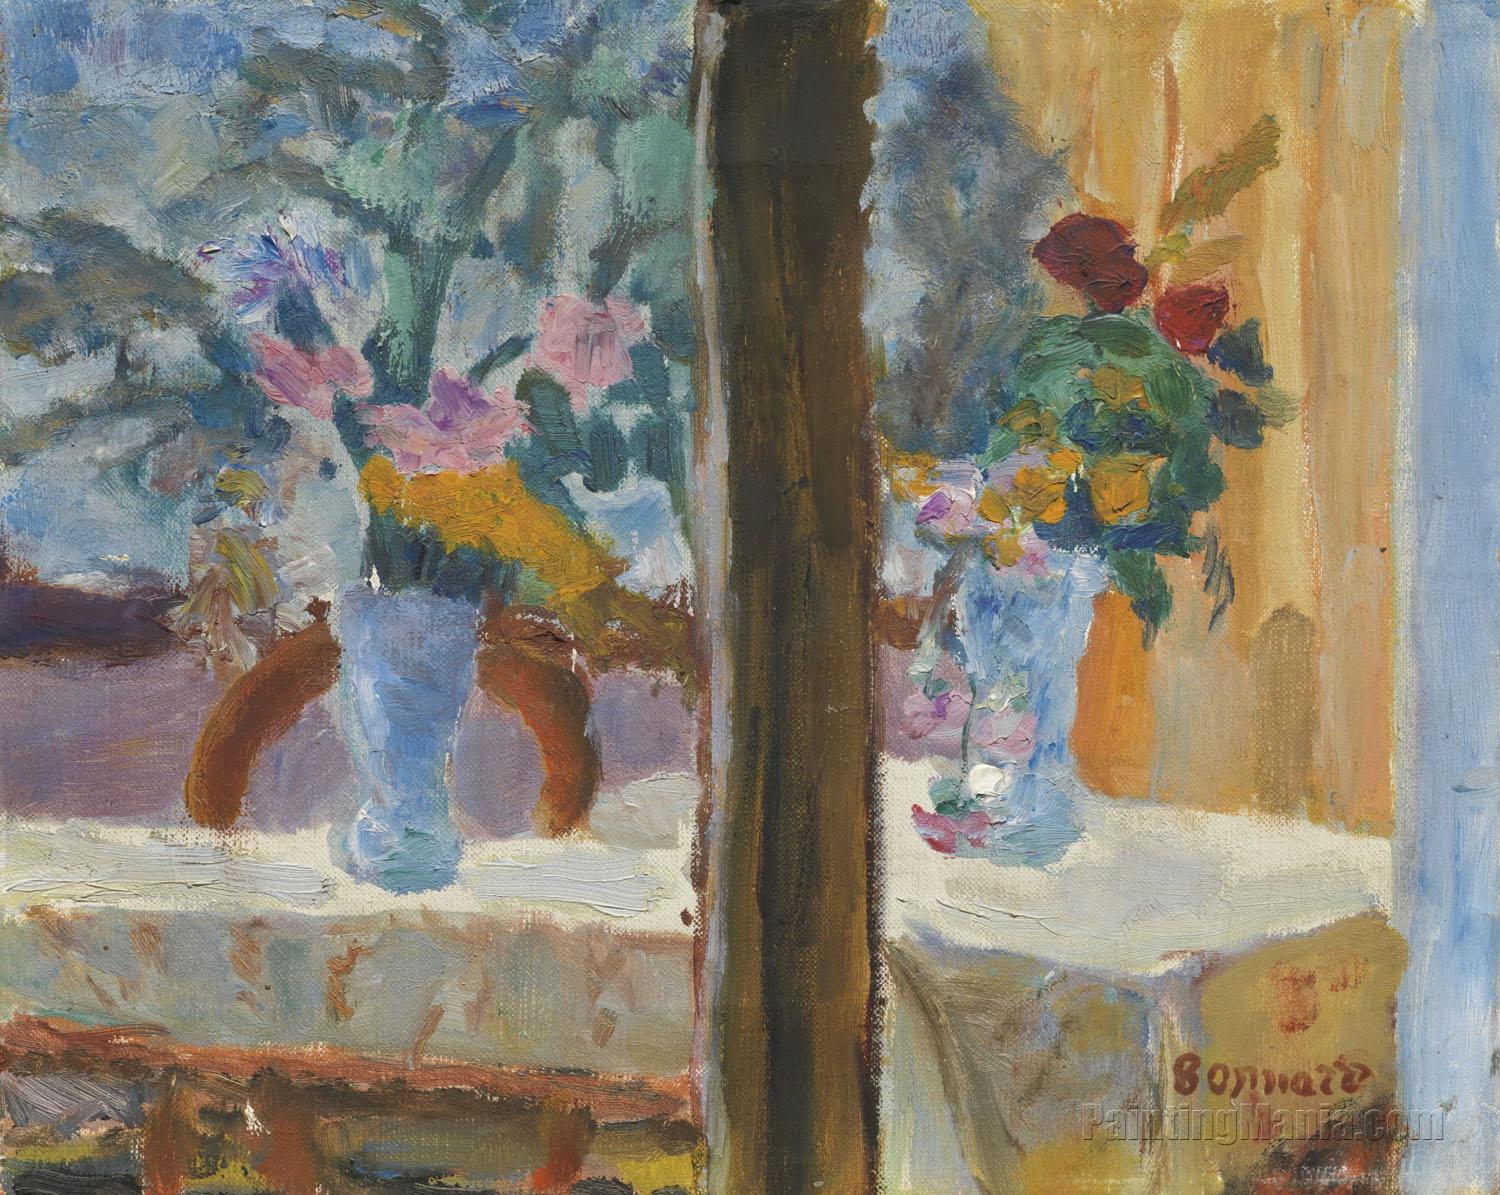 The Vase of Flowers 1922